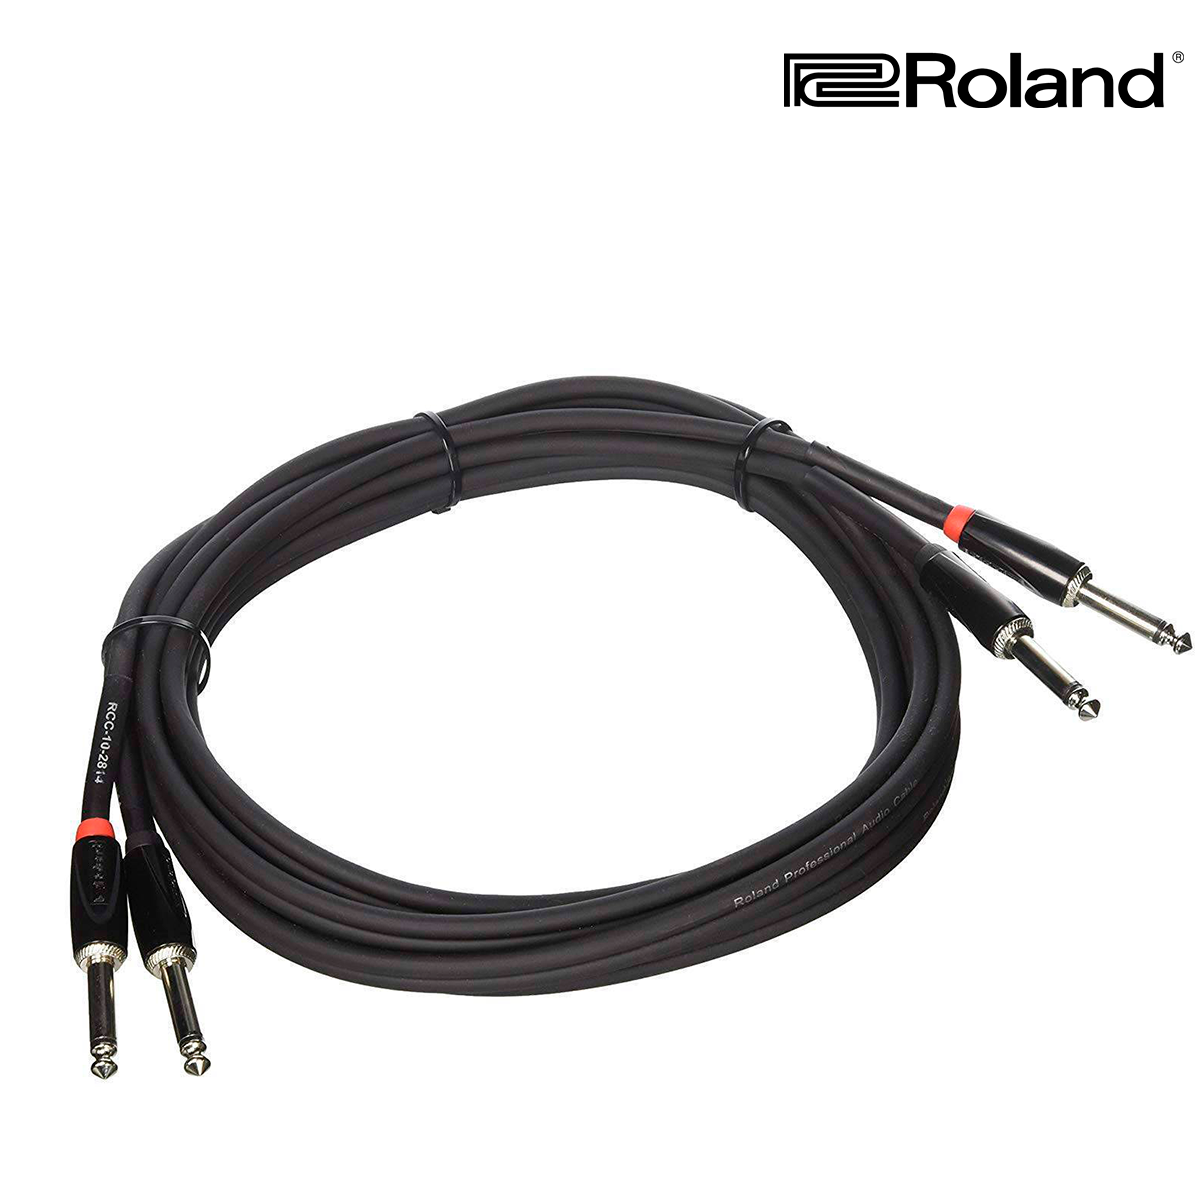 CABLE ROLAND SERIE BLACK (CABLE DOBLE) CONECTOR TR-TR PLUG 6.3MM 3 MTS